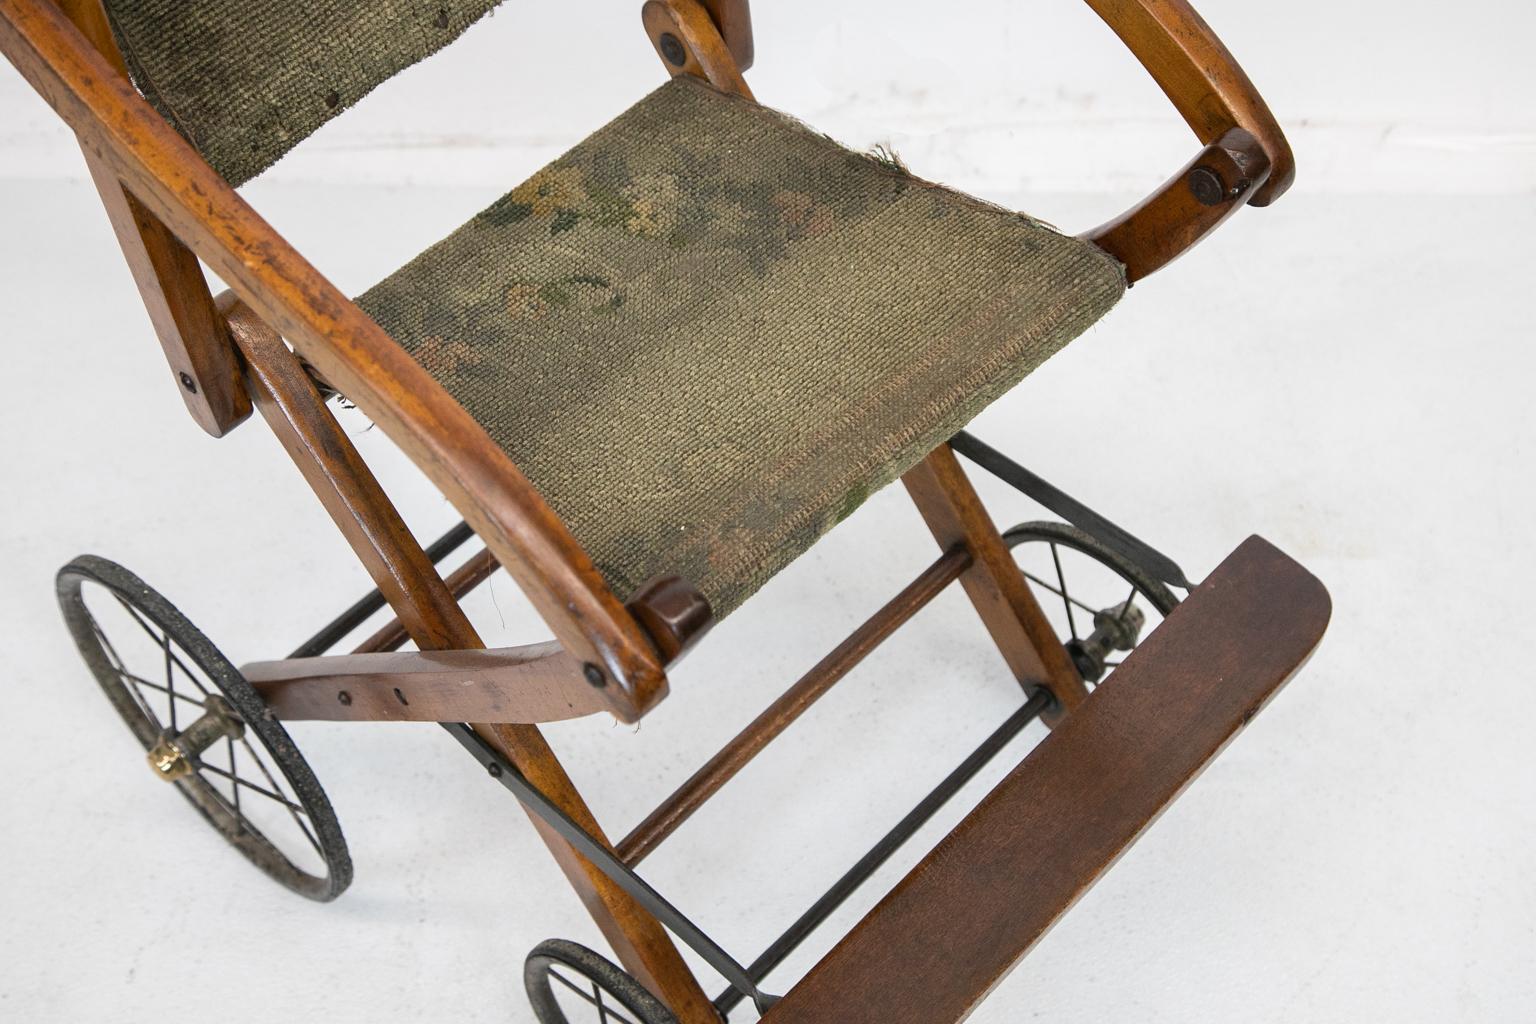 Antique English stroller has the original wire wheels with brass lugs and the original fabric seat. The back is commensurate with use and age. We purchased it on one of our buying trips to England and thought it was unique as we have never seen